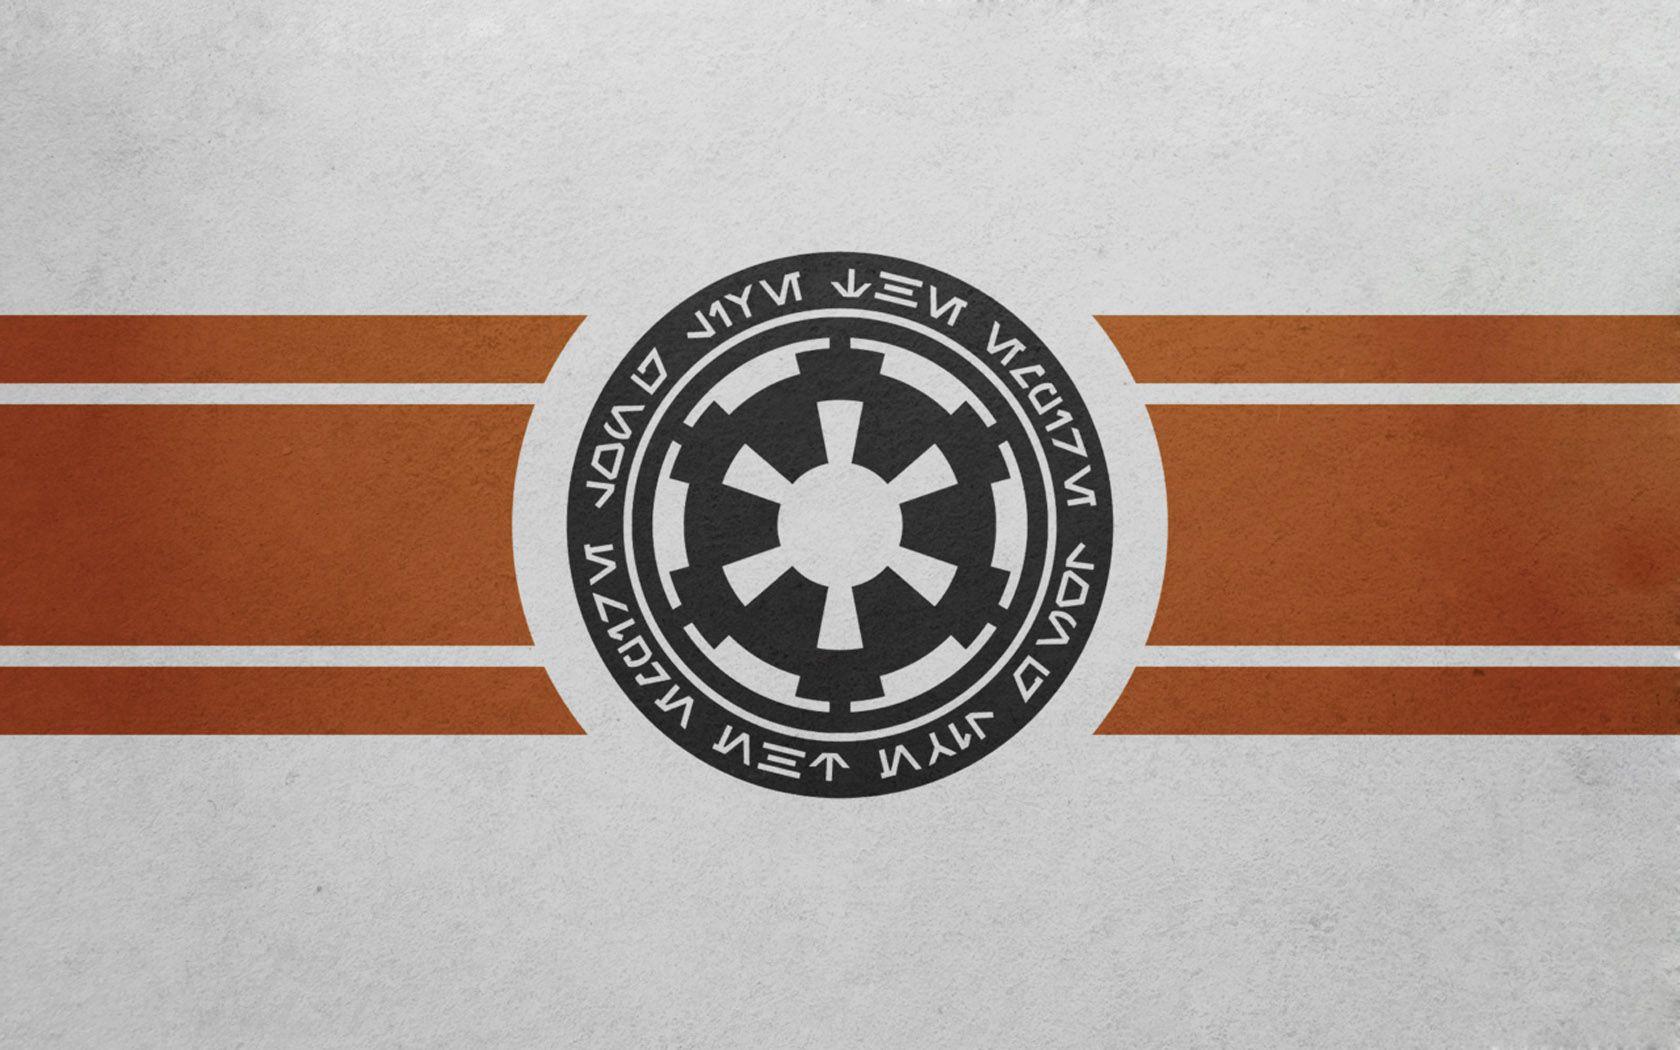 Star Wars Imperial Wallpapers - Wallpaper Cave